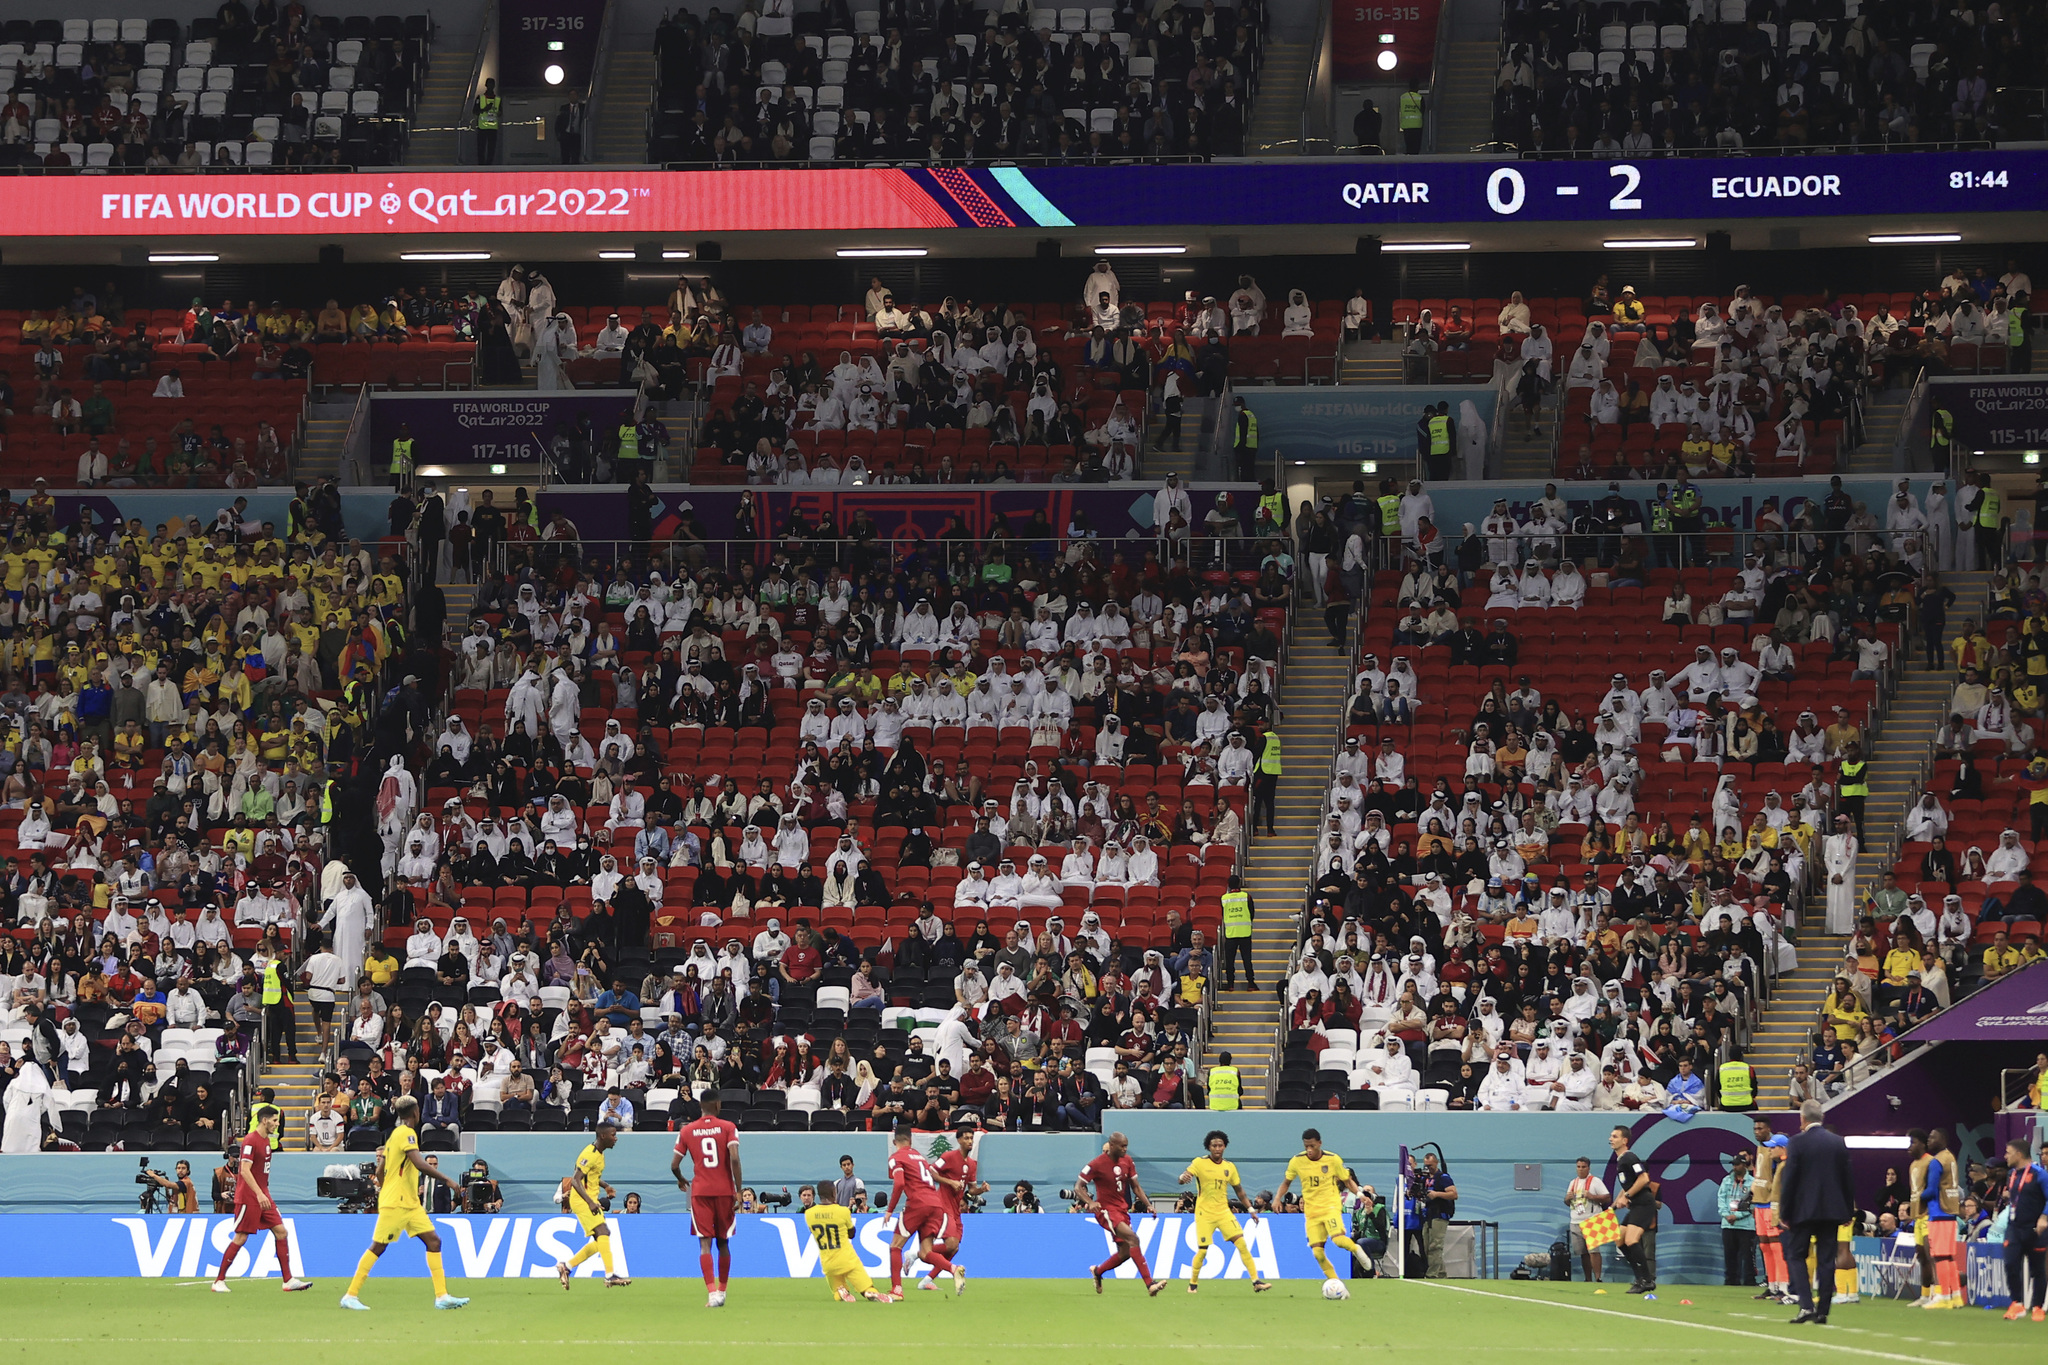 AL KHOR,  lt;HIT gt;QATAR lt;/HIT gt; - NOVEMBER 20: Empty seats are seen within the stadium during the FIFA World Cup  lt;HIT gt;Qatar lt;/HIT gt; 2022 Group A match between  lt;HIT gt;Qatar lt;/HIT gt; and Ecuador at Al Bayt Stadium on November 20, 2022 in Al Khor,  lt;HIT gt;Qatar lt;/HIT gt;. (Photo by Simon Stacpoole/Offside/Offside via Getty Images)